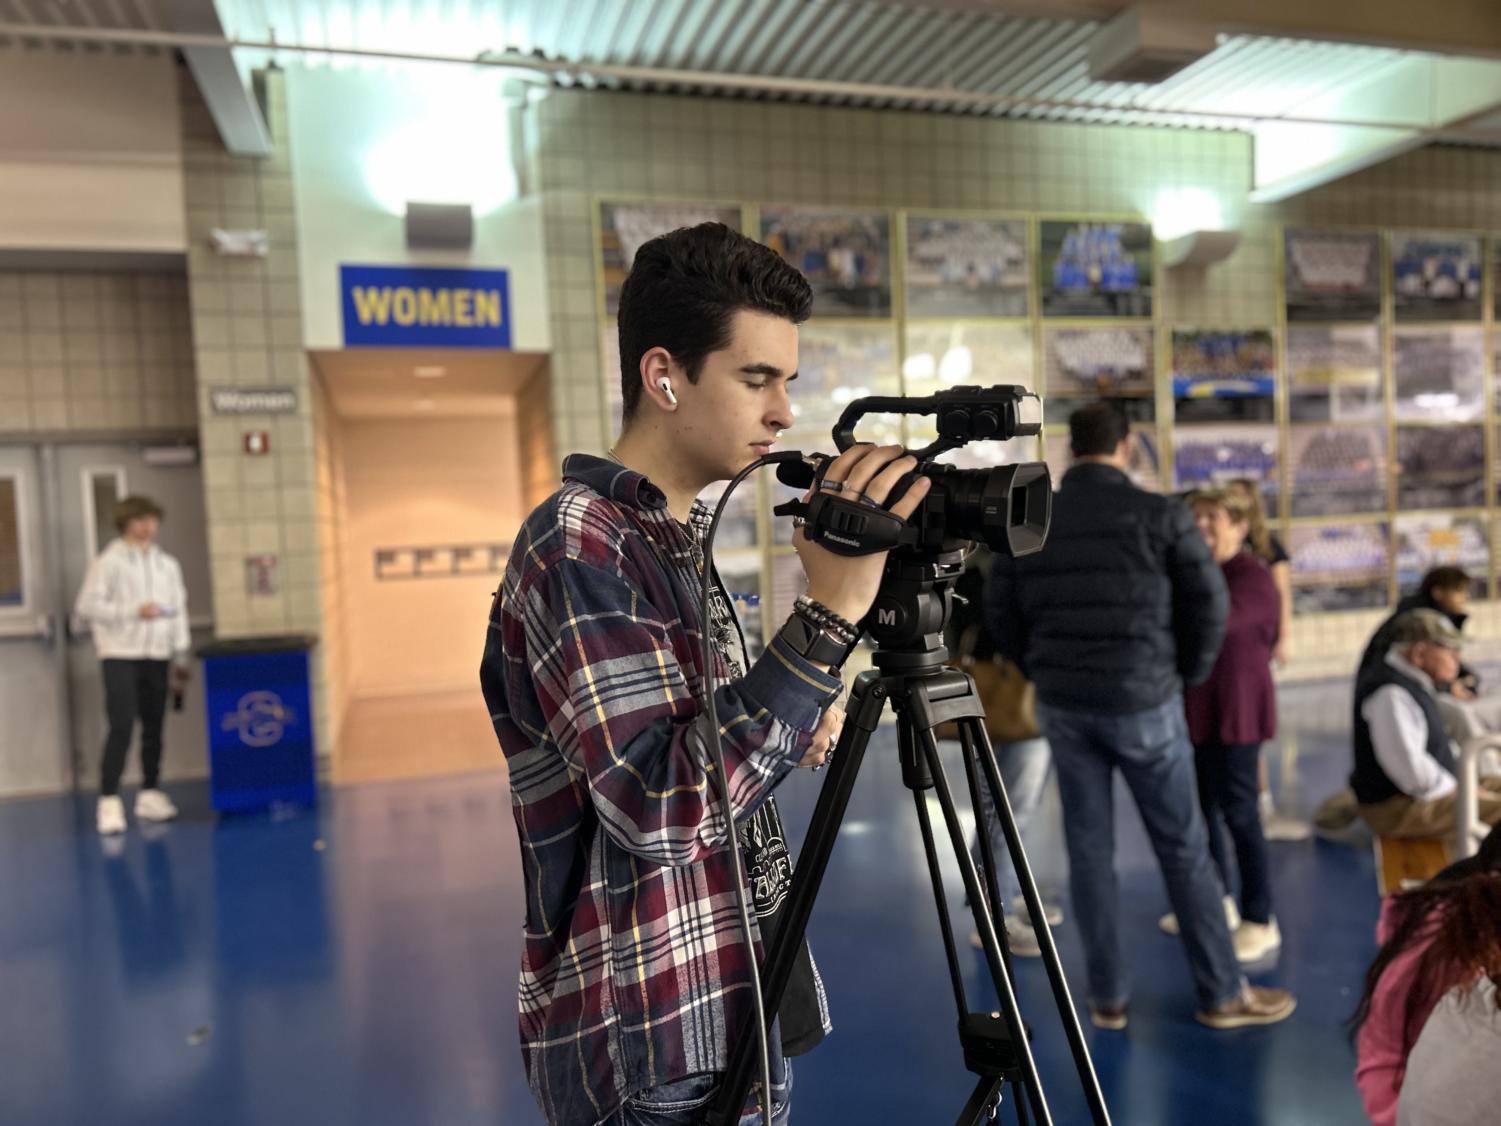 Cole operating a camera at a basketball game